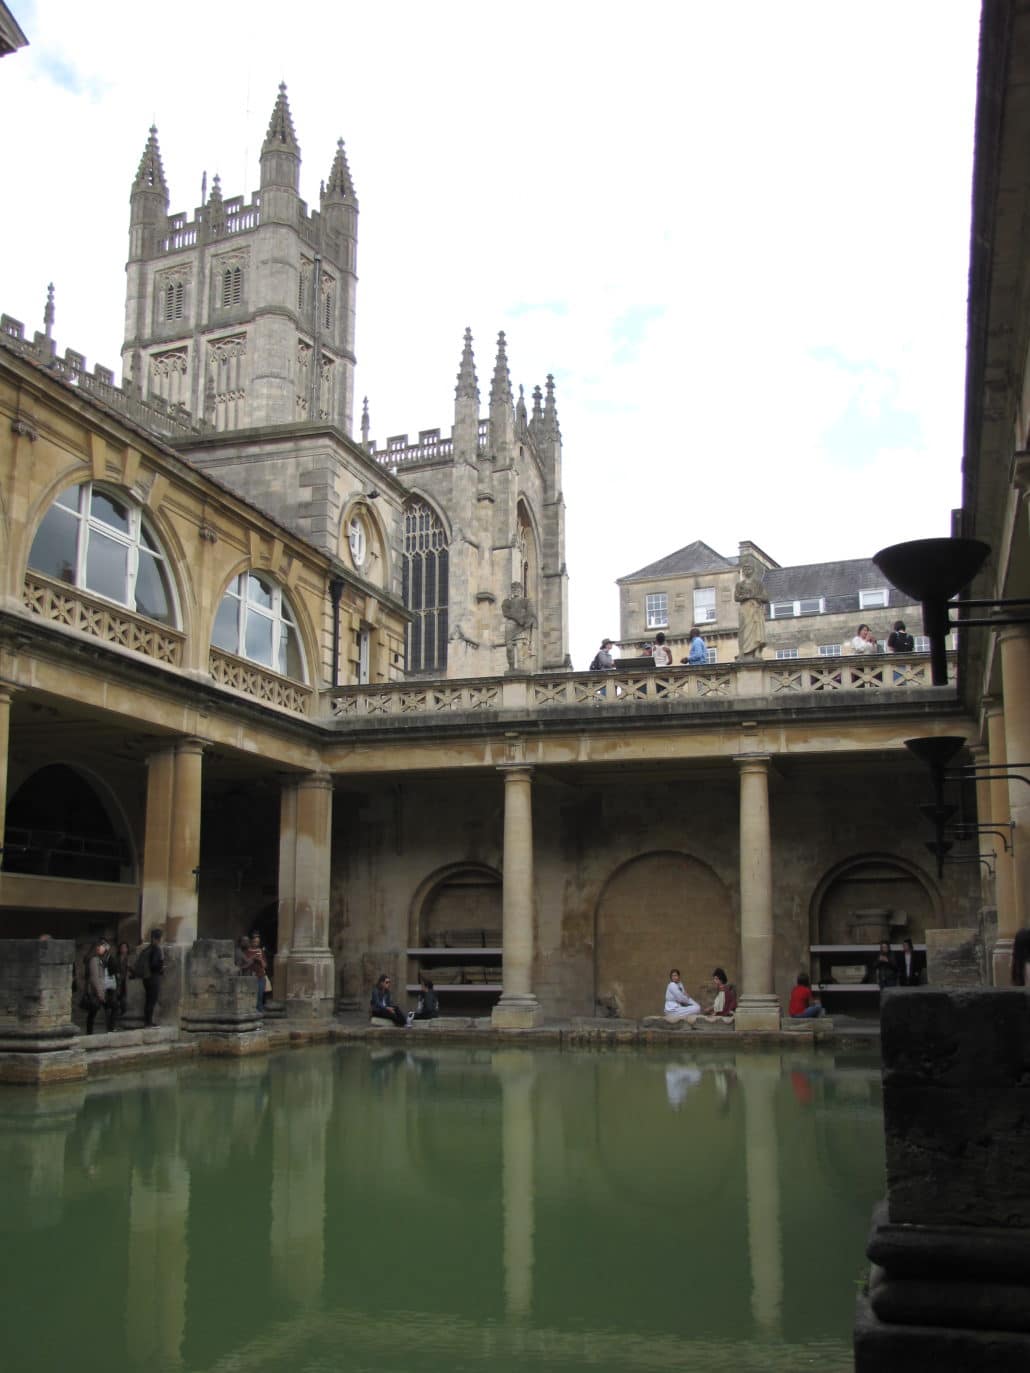 The 2,000-year-old Roman bath compound with Bath Abbey rising above it